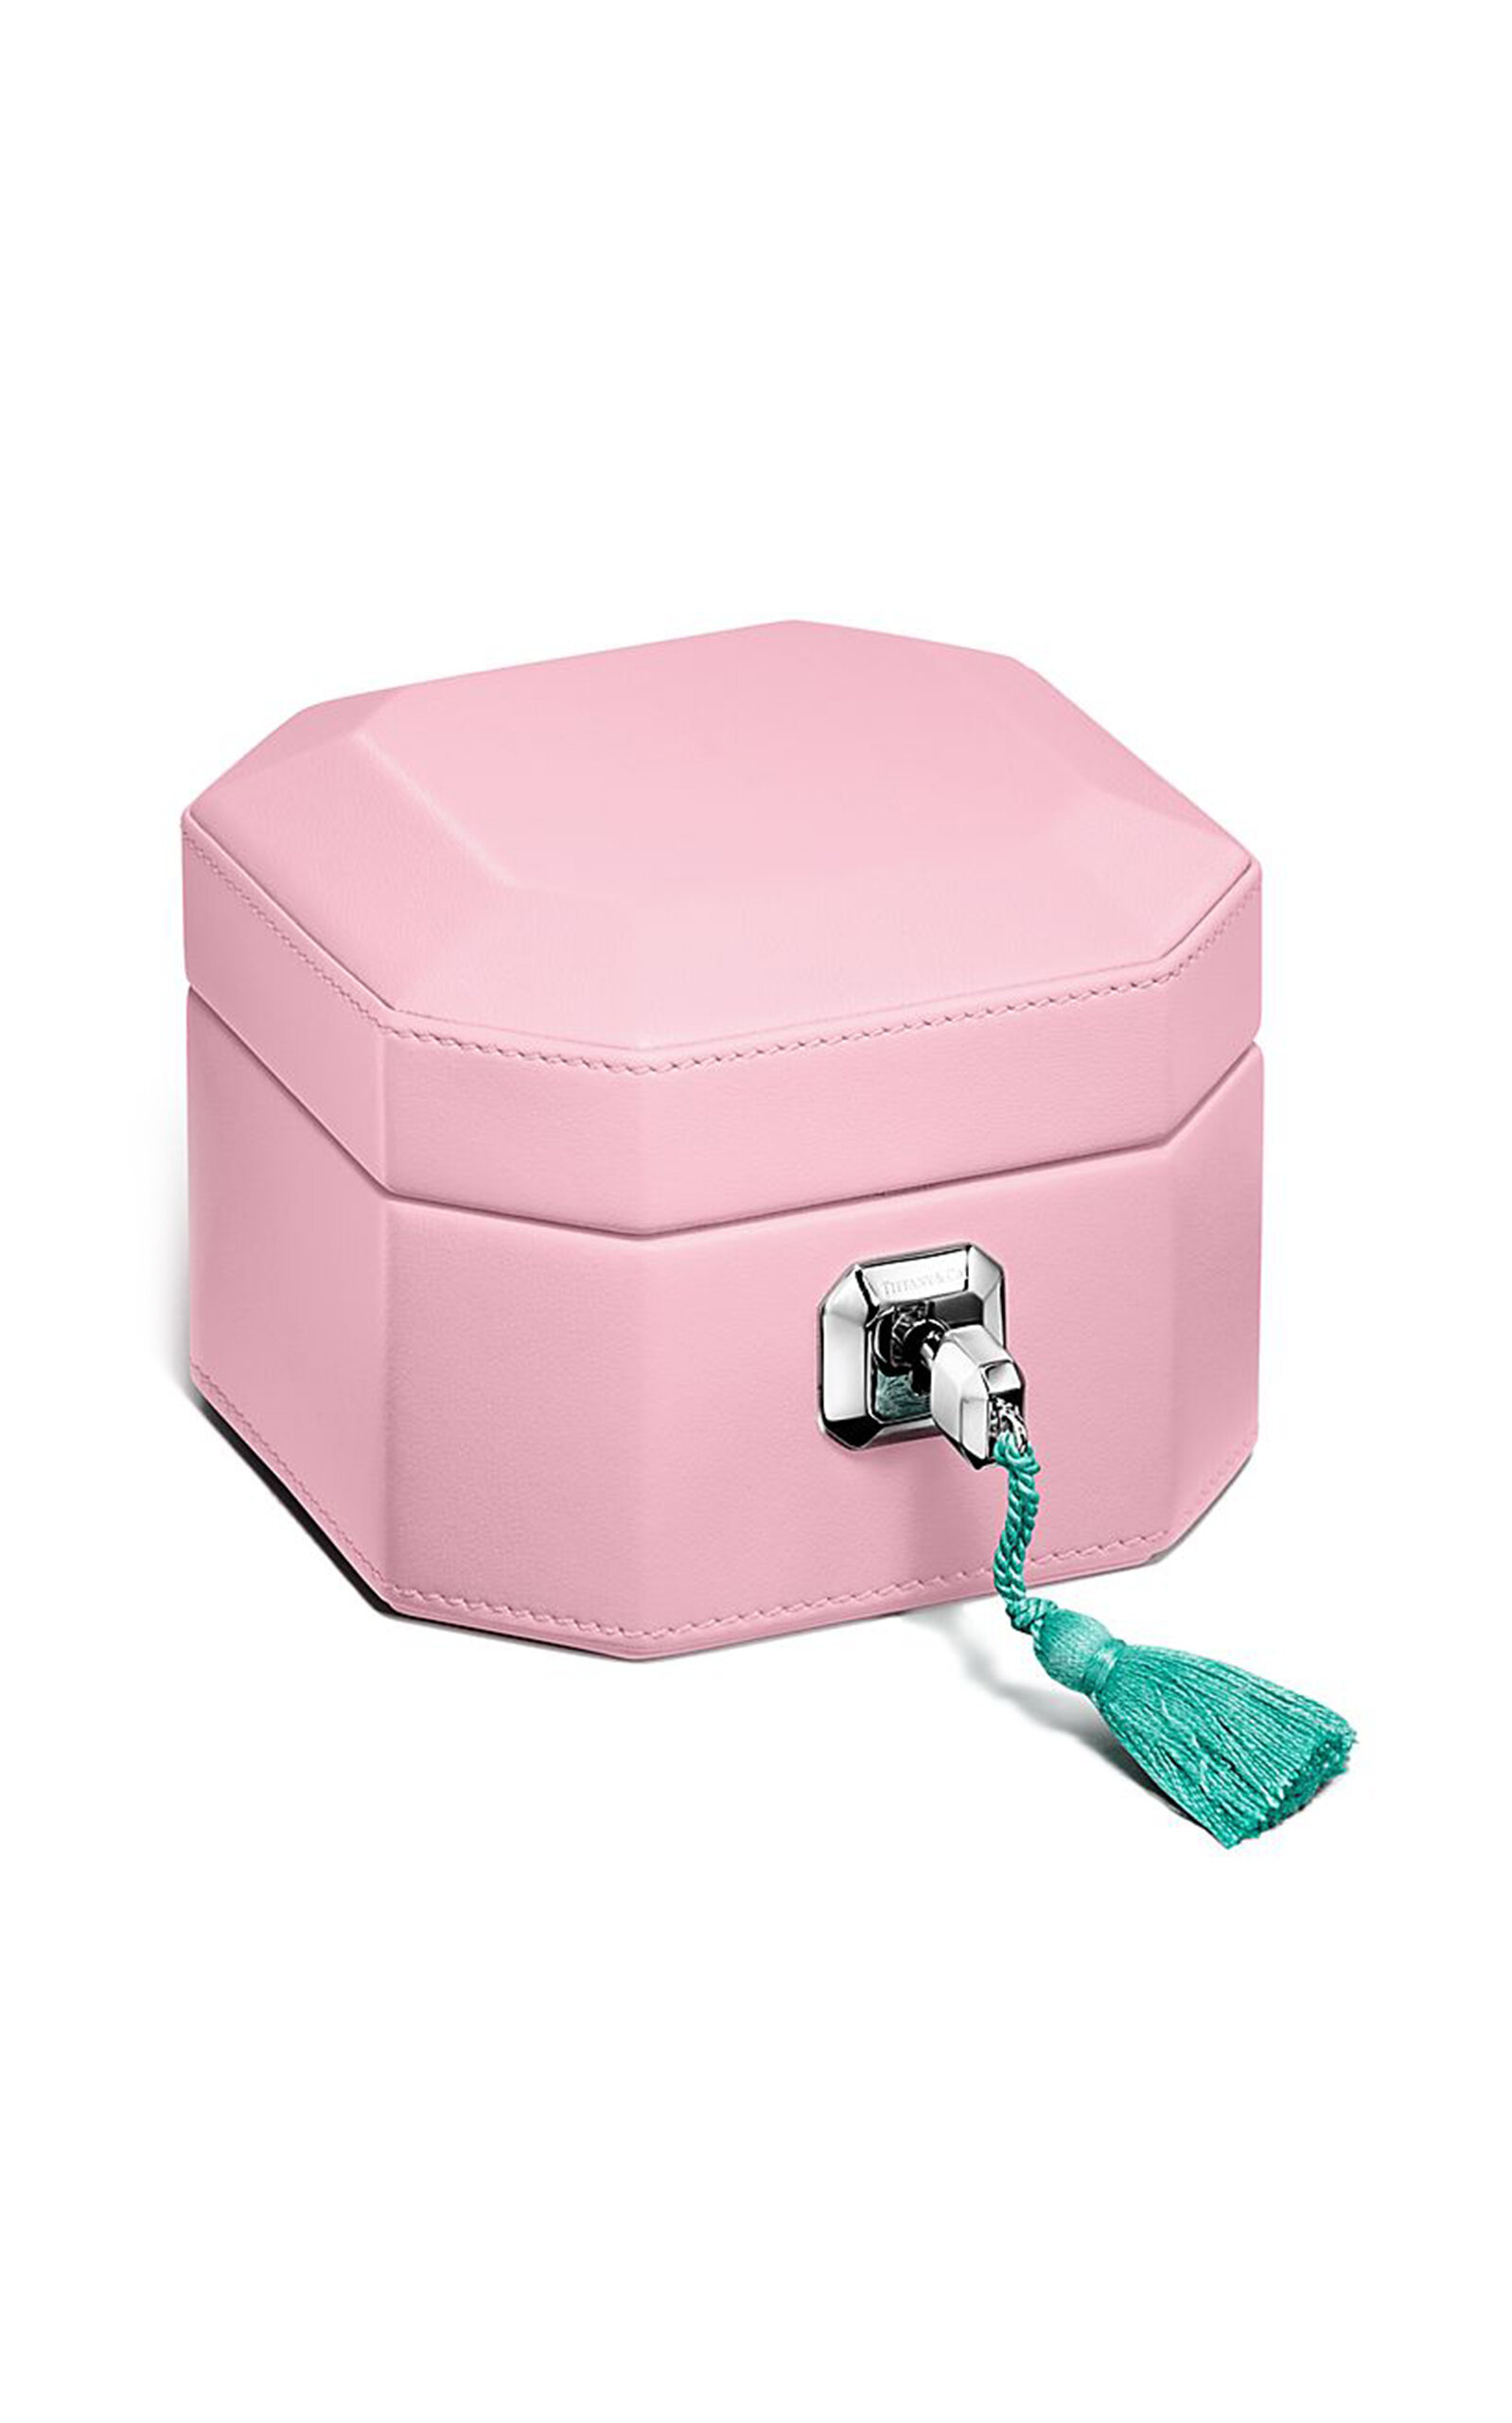 Tiffany & Co Small Facets Leather Jewelry Box In Pink